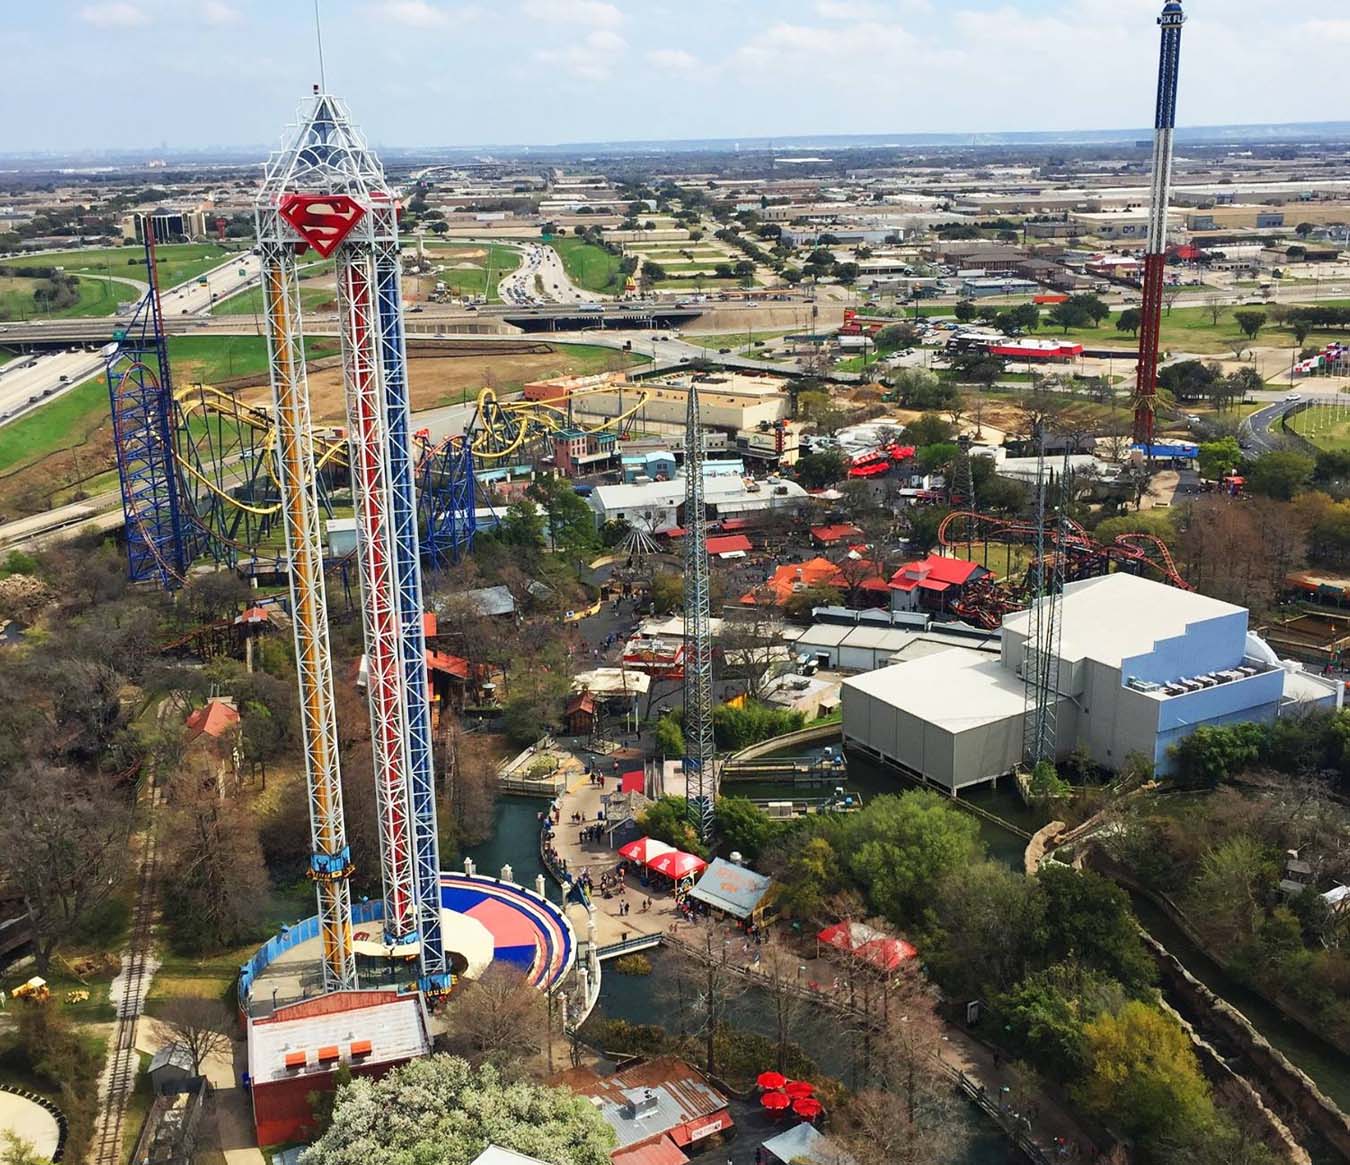 Things to Do in Dallas - Six Flags Over Texas